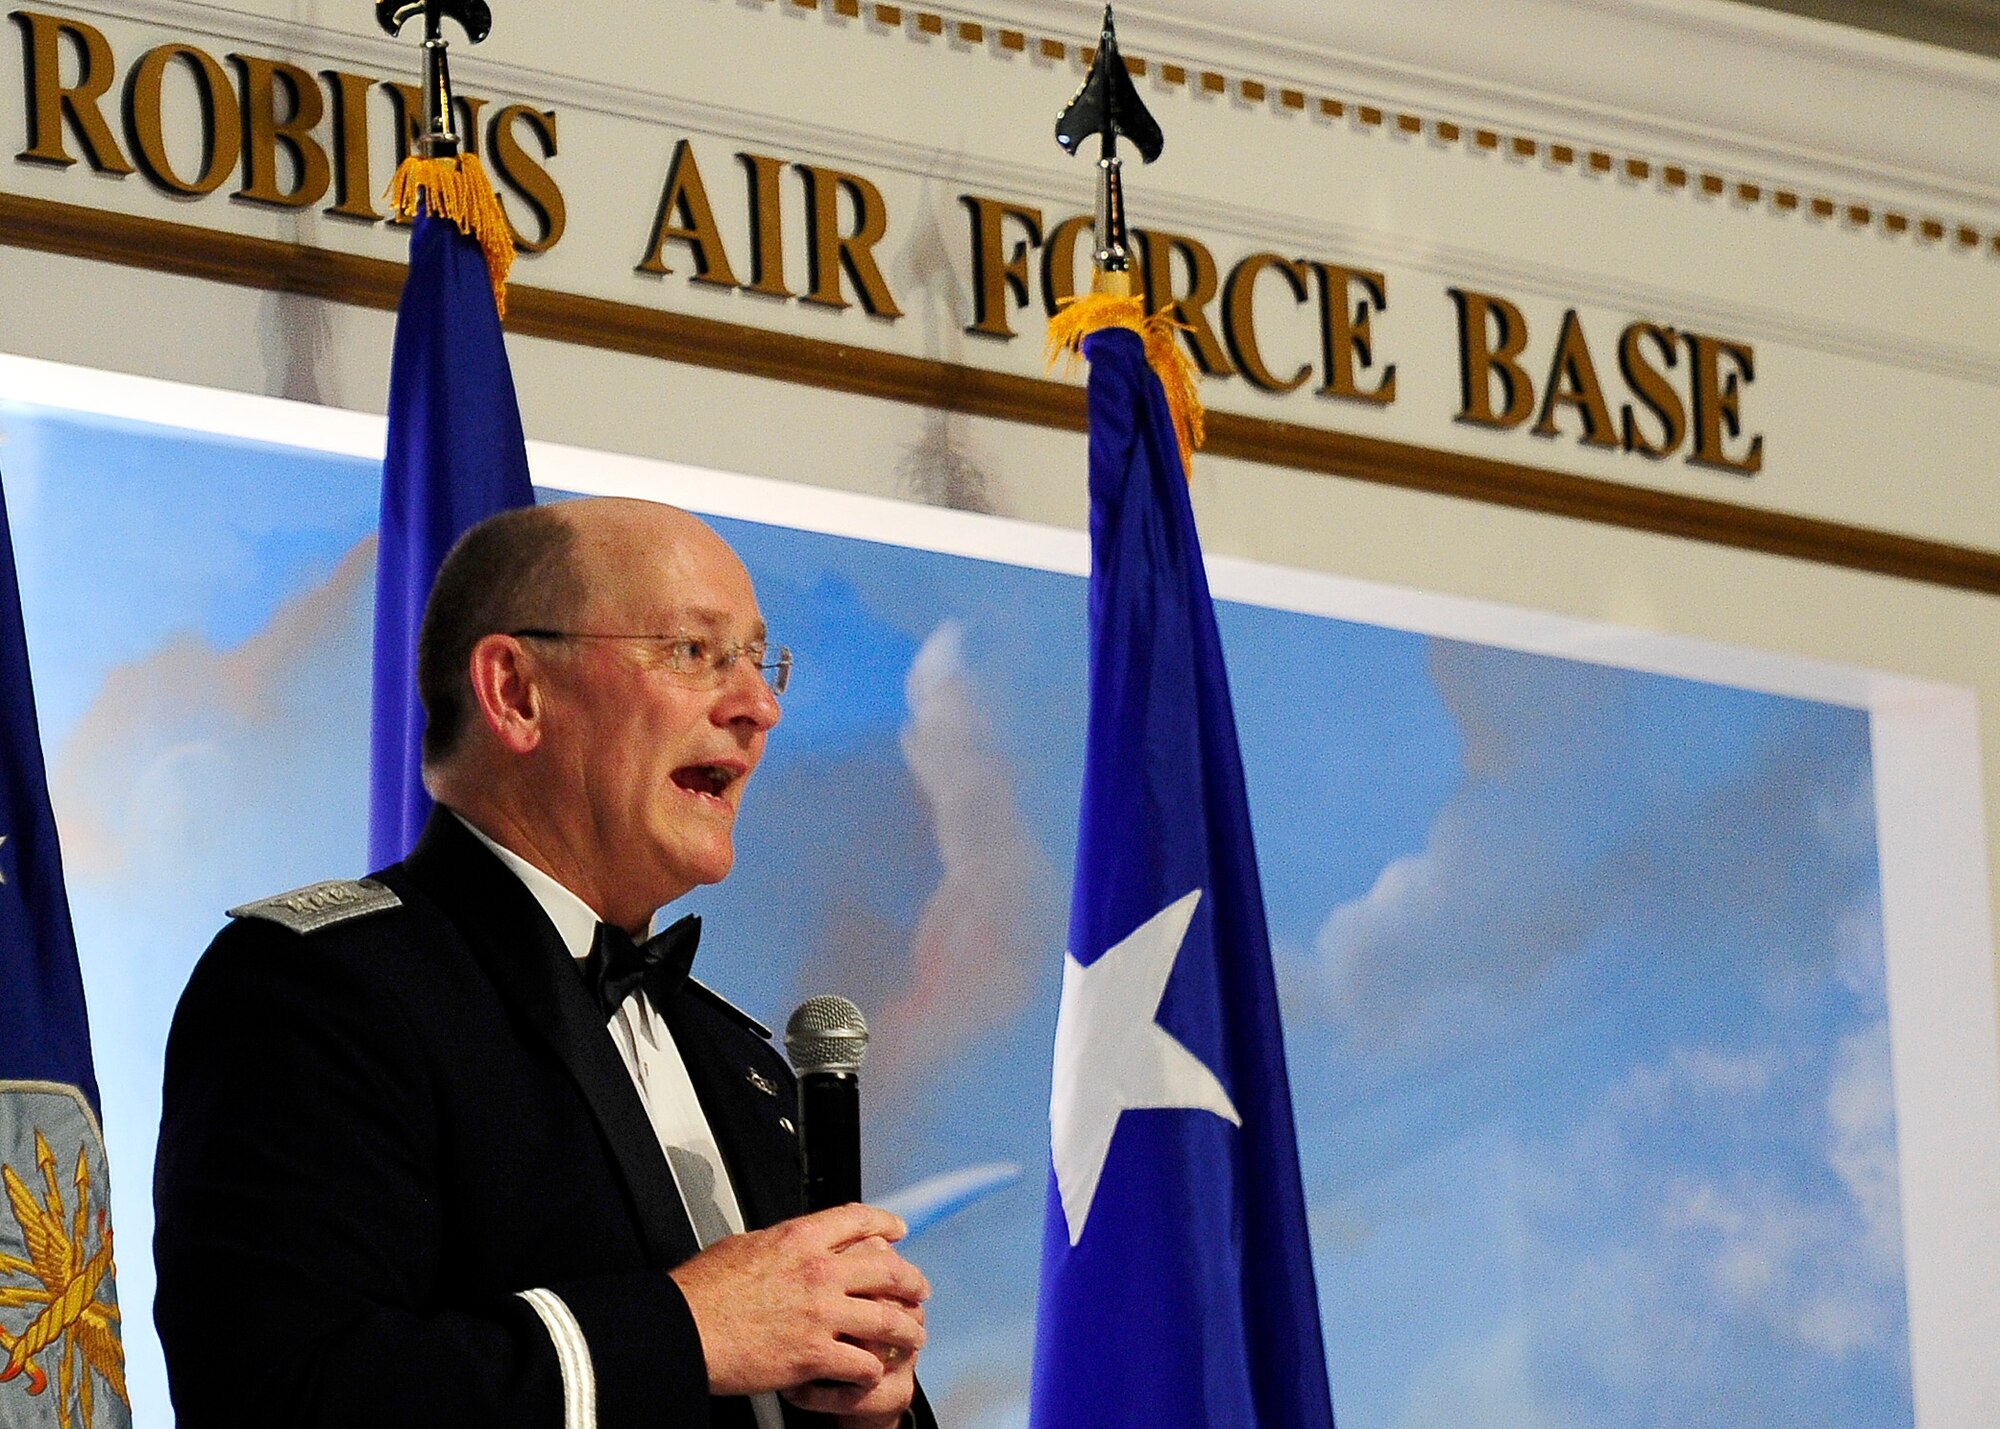 Former chief of Air Force Reserve Command, Lt. Gen. James F. Jackson, gives a speech during the Order of the Sword ceremony in his honor at the Museum of Aviation in Warner Robins, Ga., July 13, 2016. The Order of the Sword is an honor awarded by the NCOs of a command to recognize individuals they hold in high esteem and for their contributions to the enlisted corps. (U.S. Air Force photo by Tech. Sgt. Stephen D. Schester)